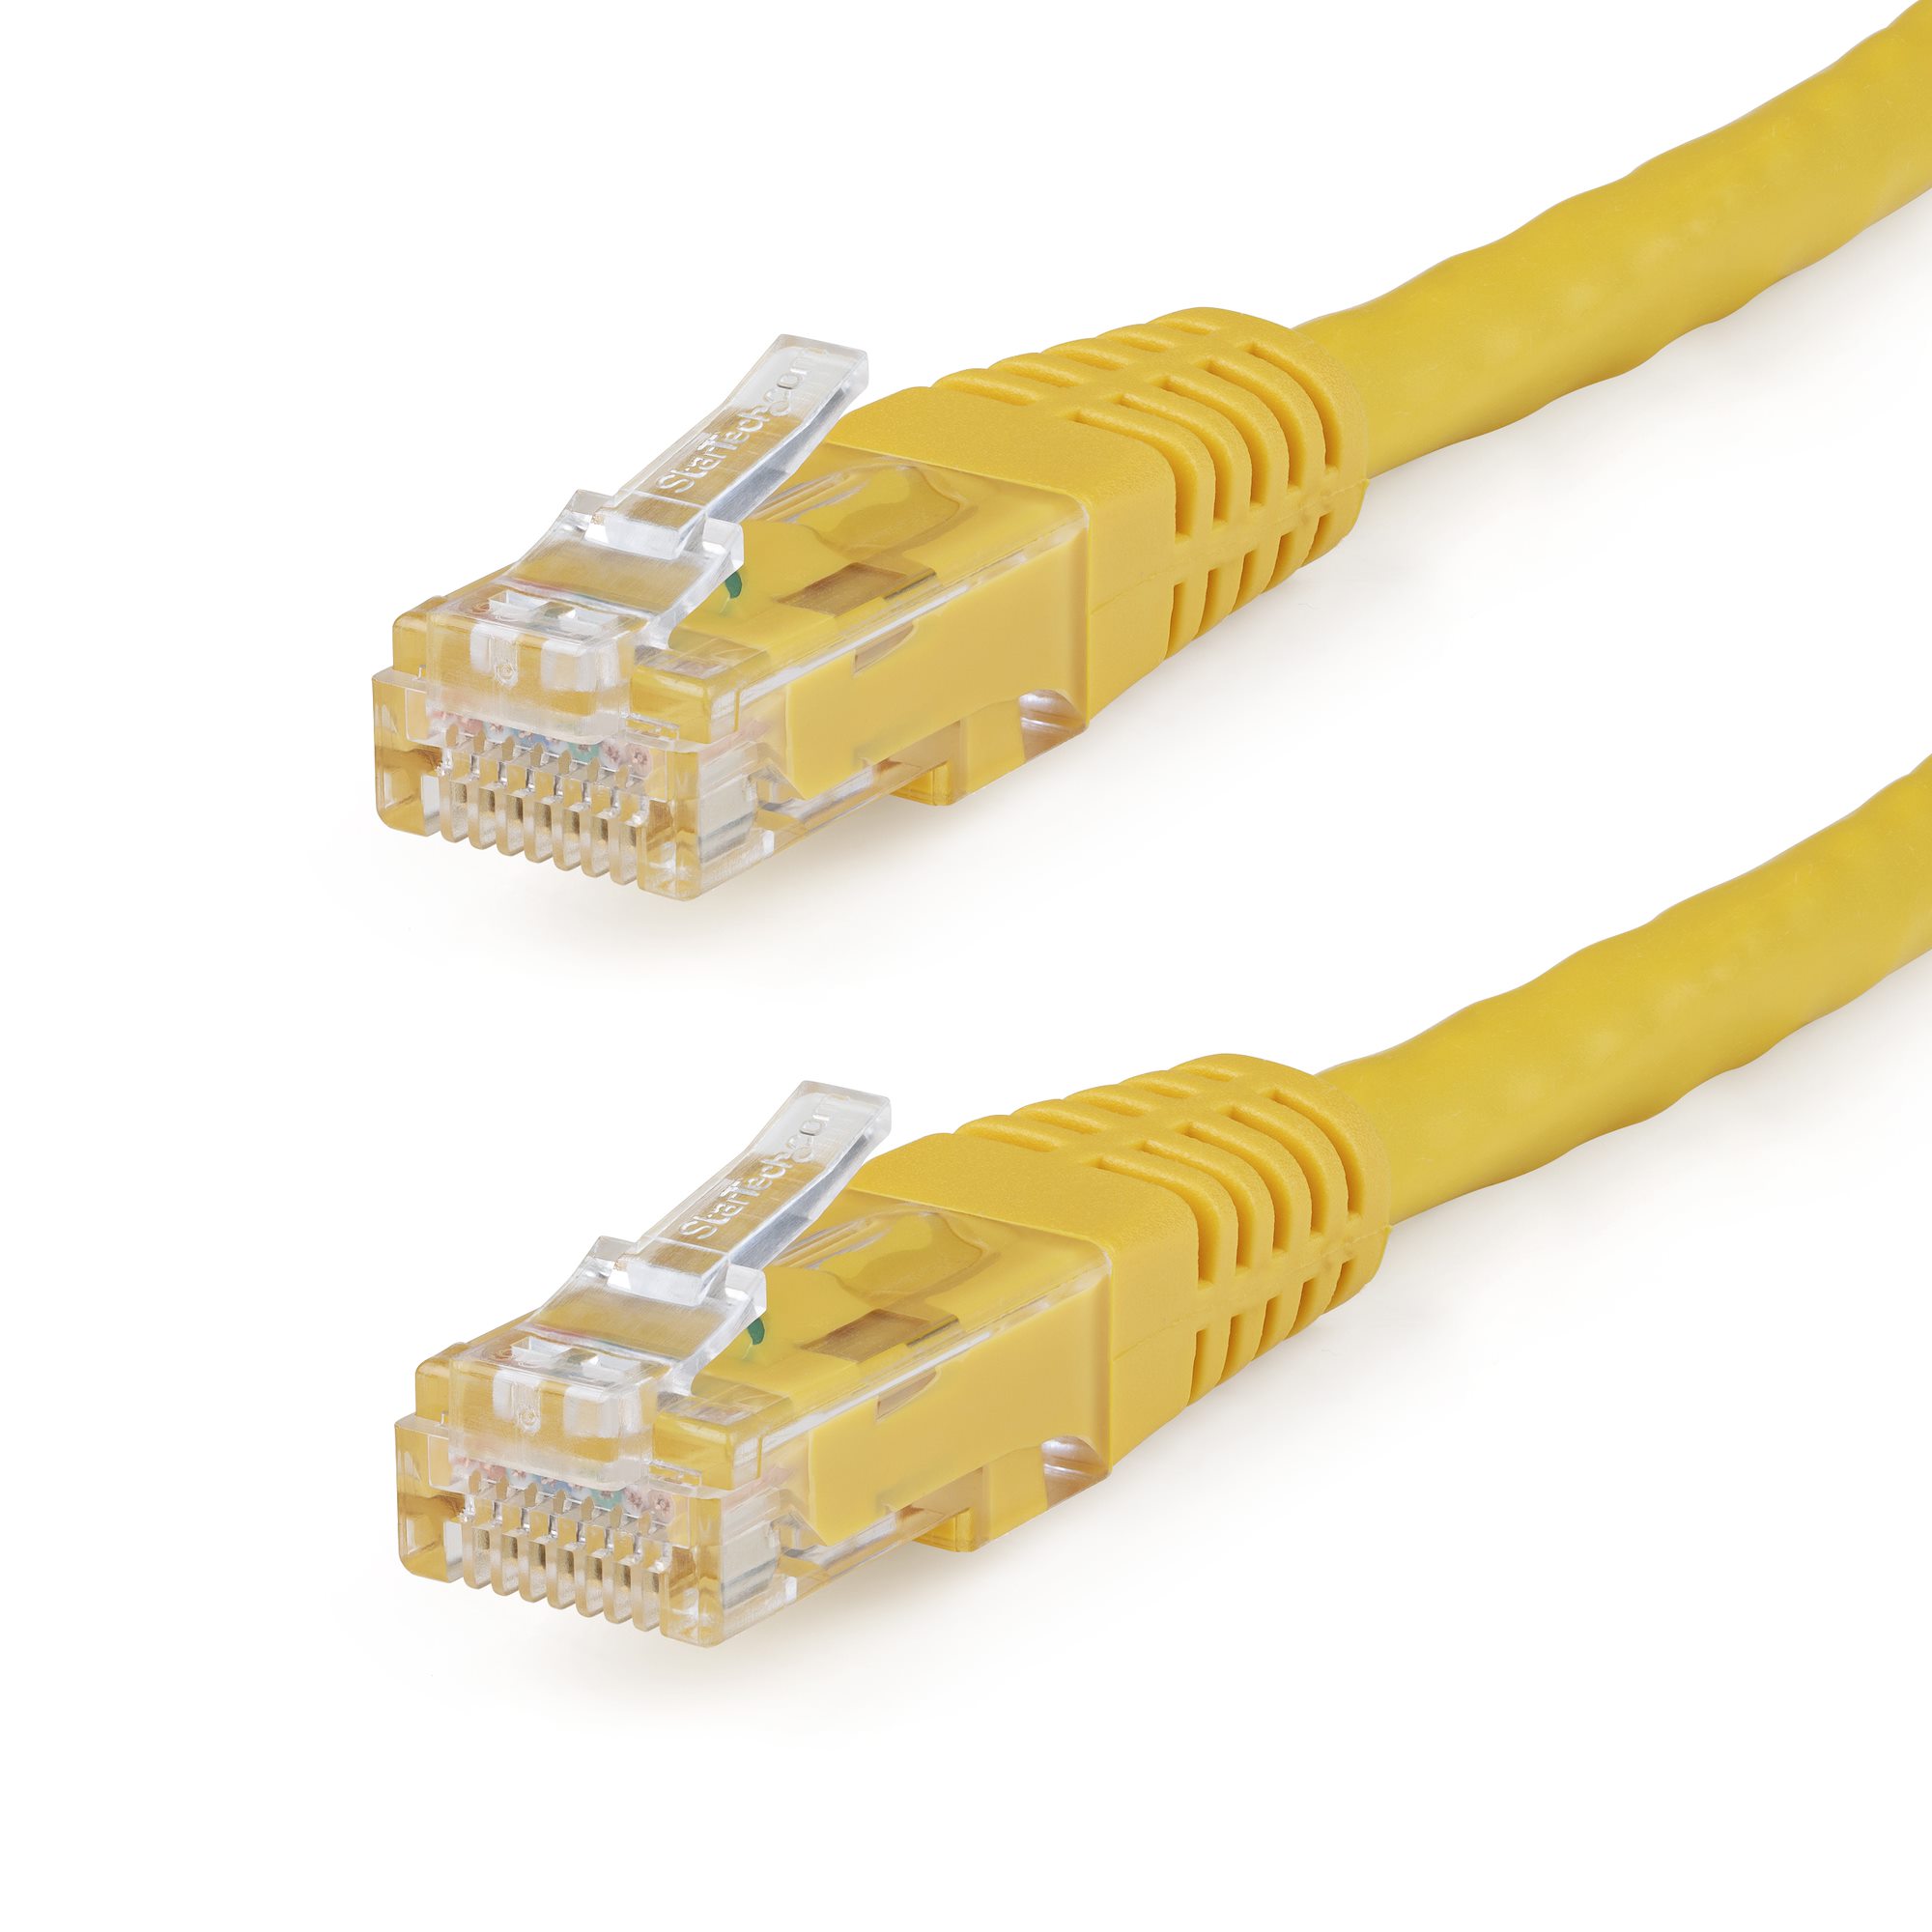 6ft CAT6 Ethernet Cable Yellow Cat 6 PoE (C6PATCH6YL) - Cat 6 Cables